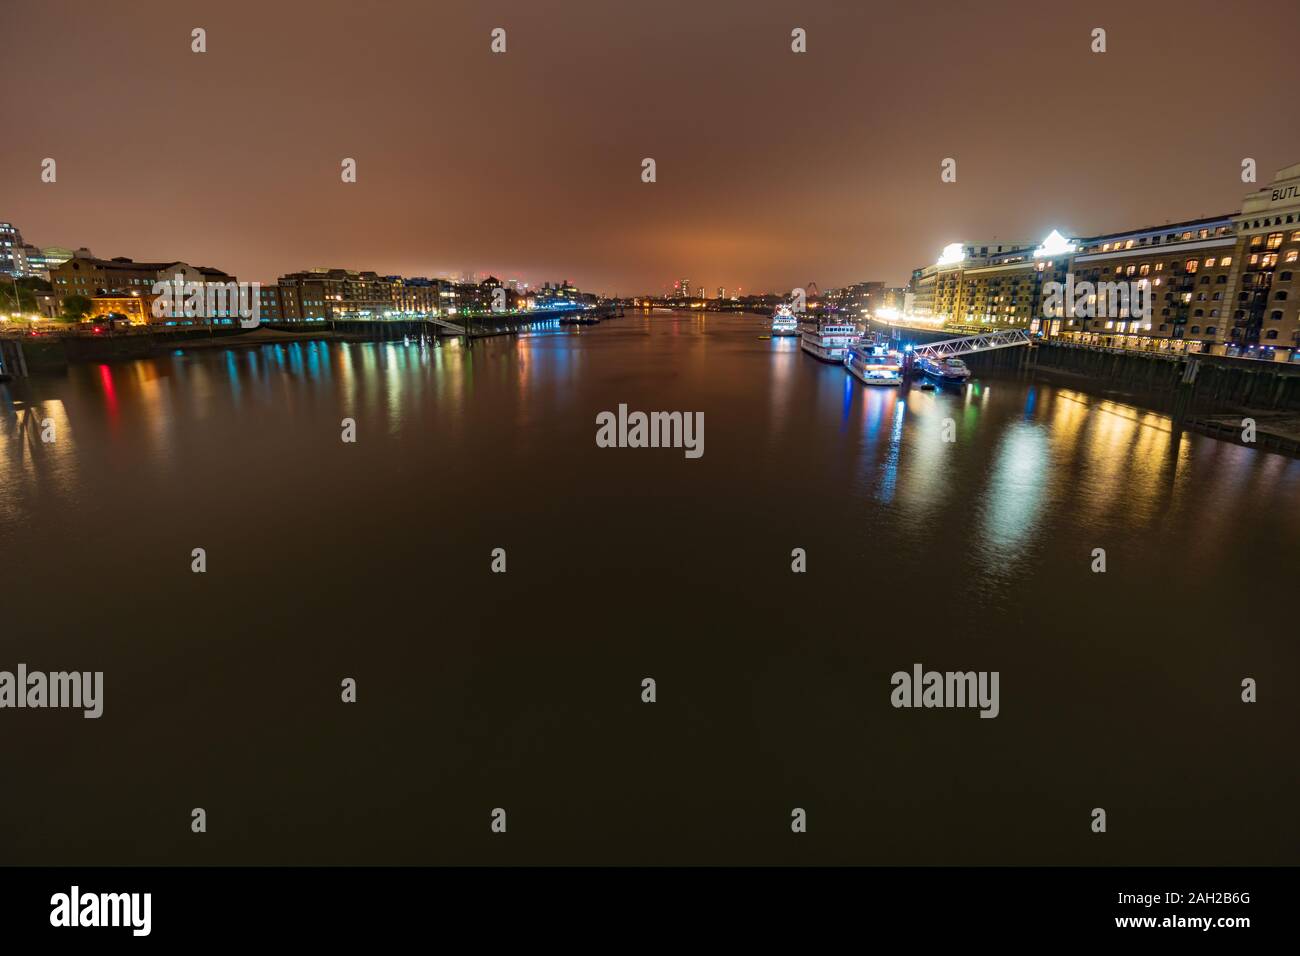 View of the Butler's Wharf at night from the Tower bridge, London, England, UK, GB Stock Photo